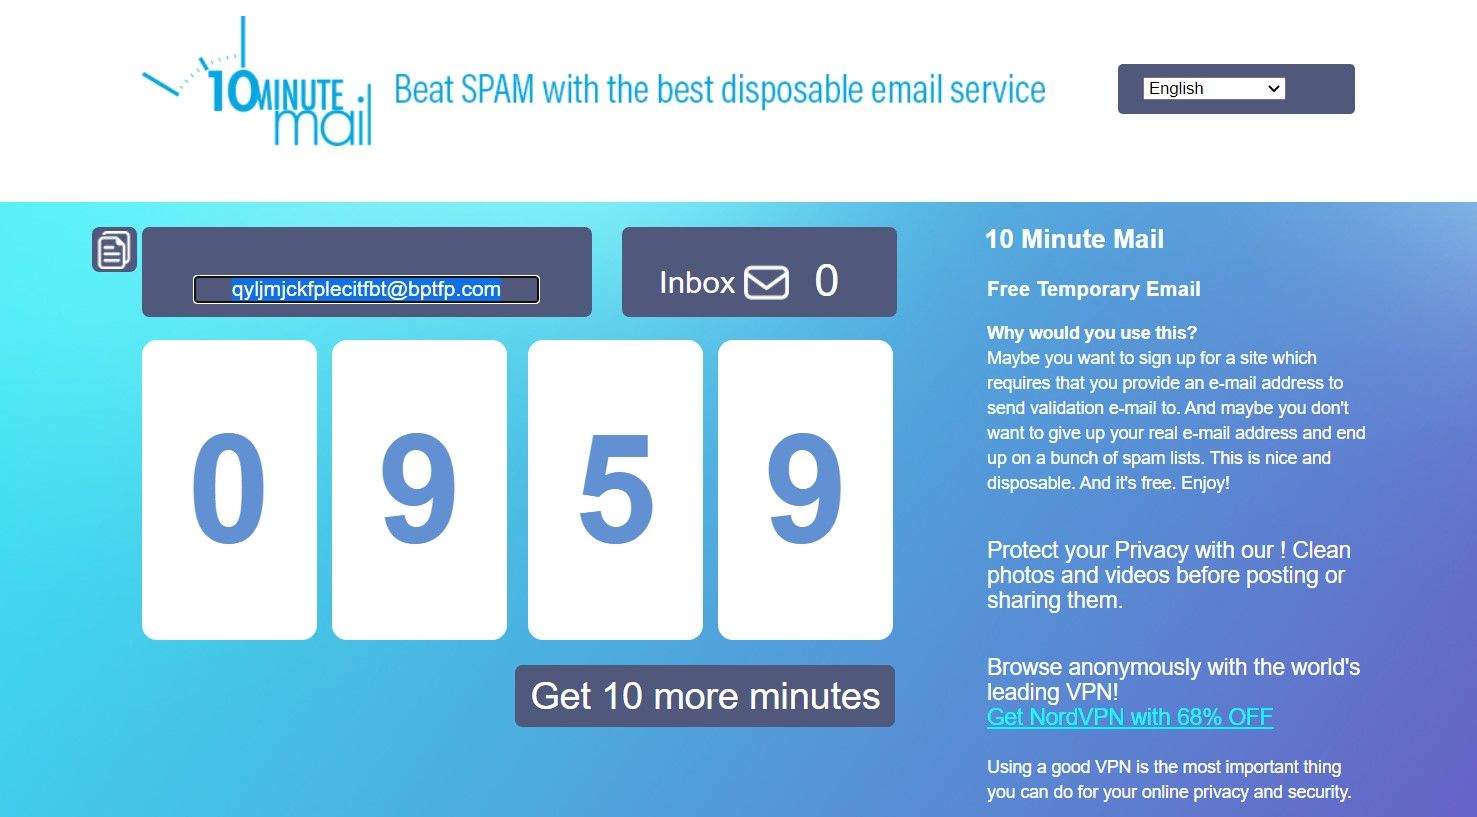 use 10minutemail for temporary email